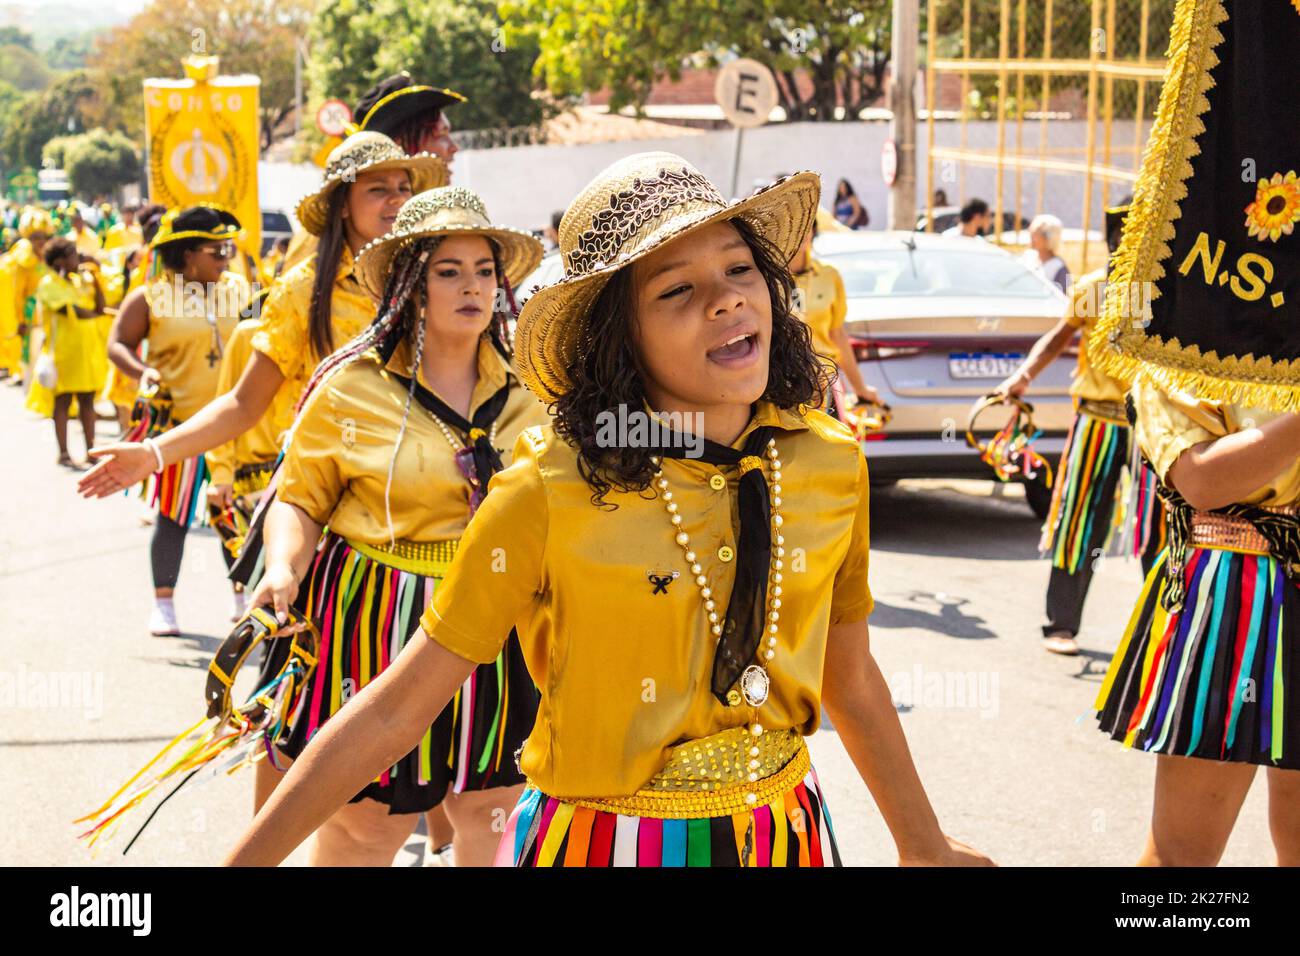 Goiânia, Goias, Brazil – September 11, 2022: Group of revelers in yellow clothes singing and dancing during the Congadas in Goiania. Stock Photo